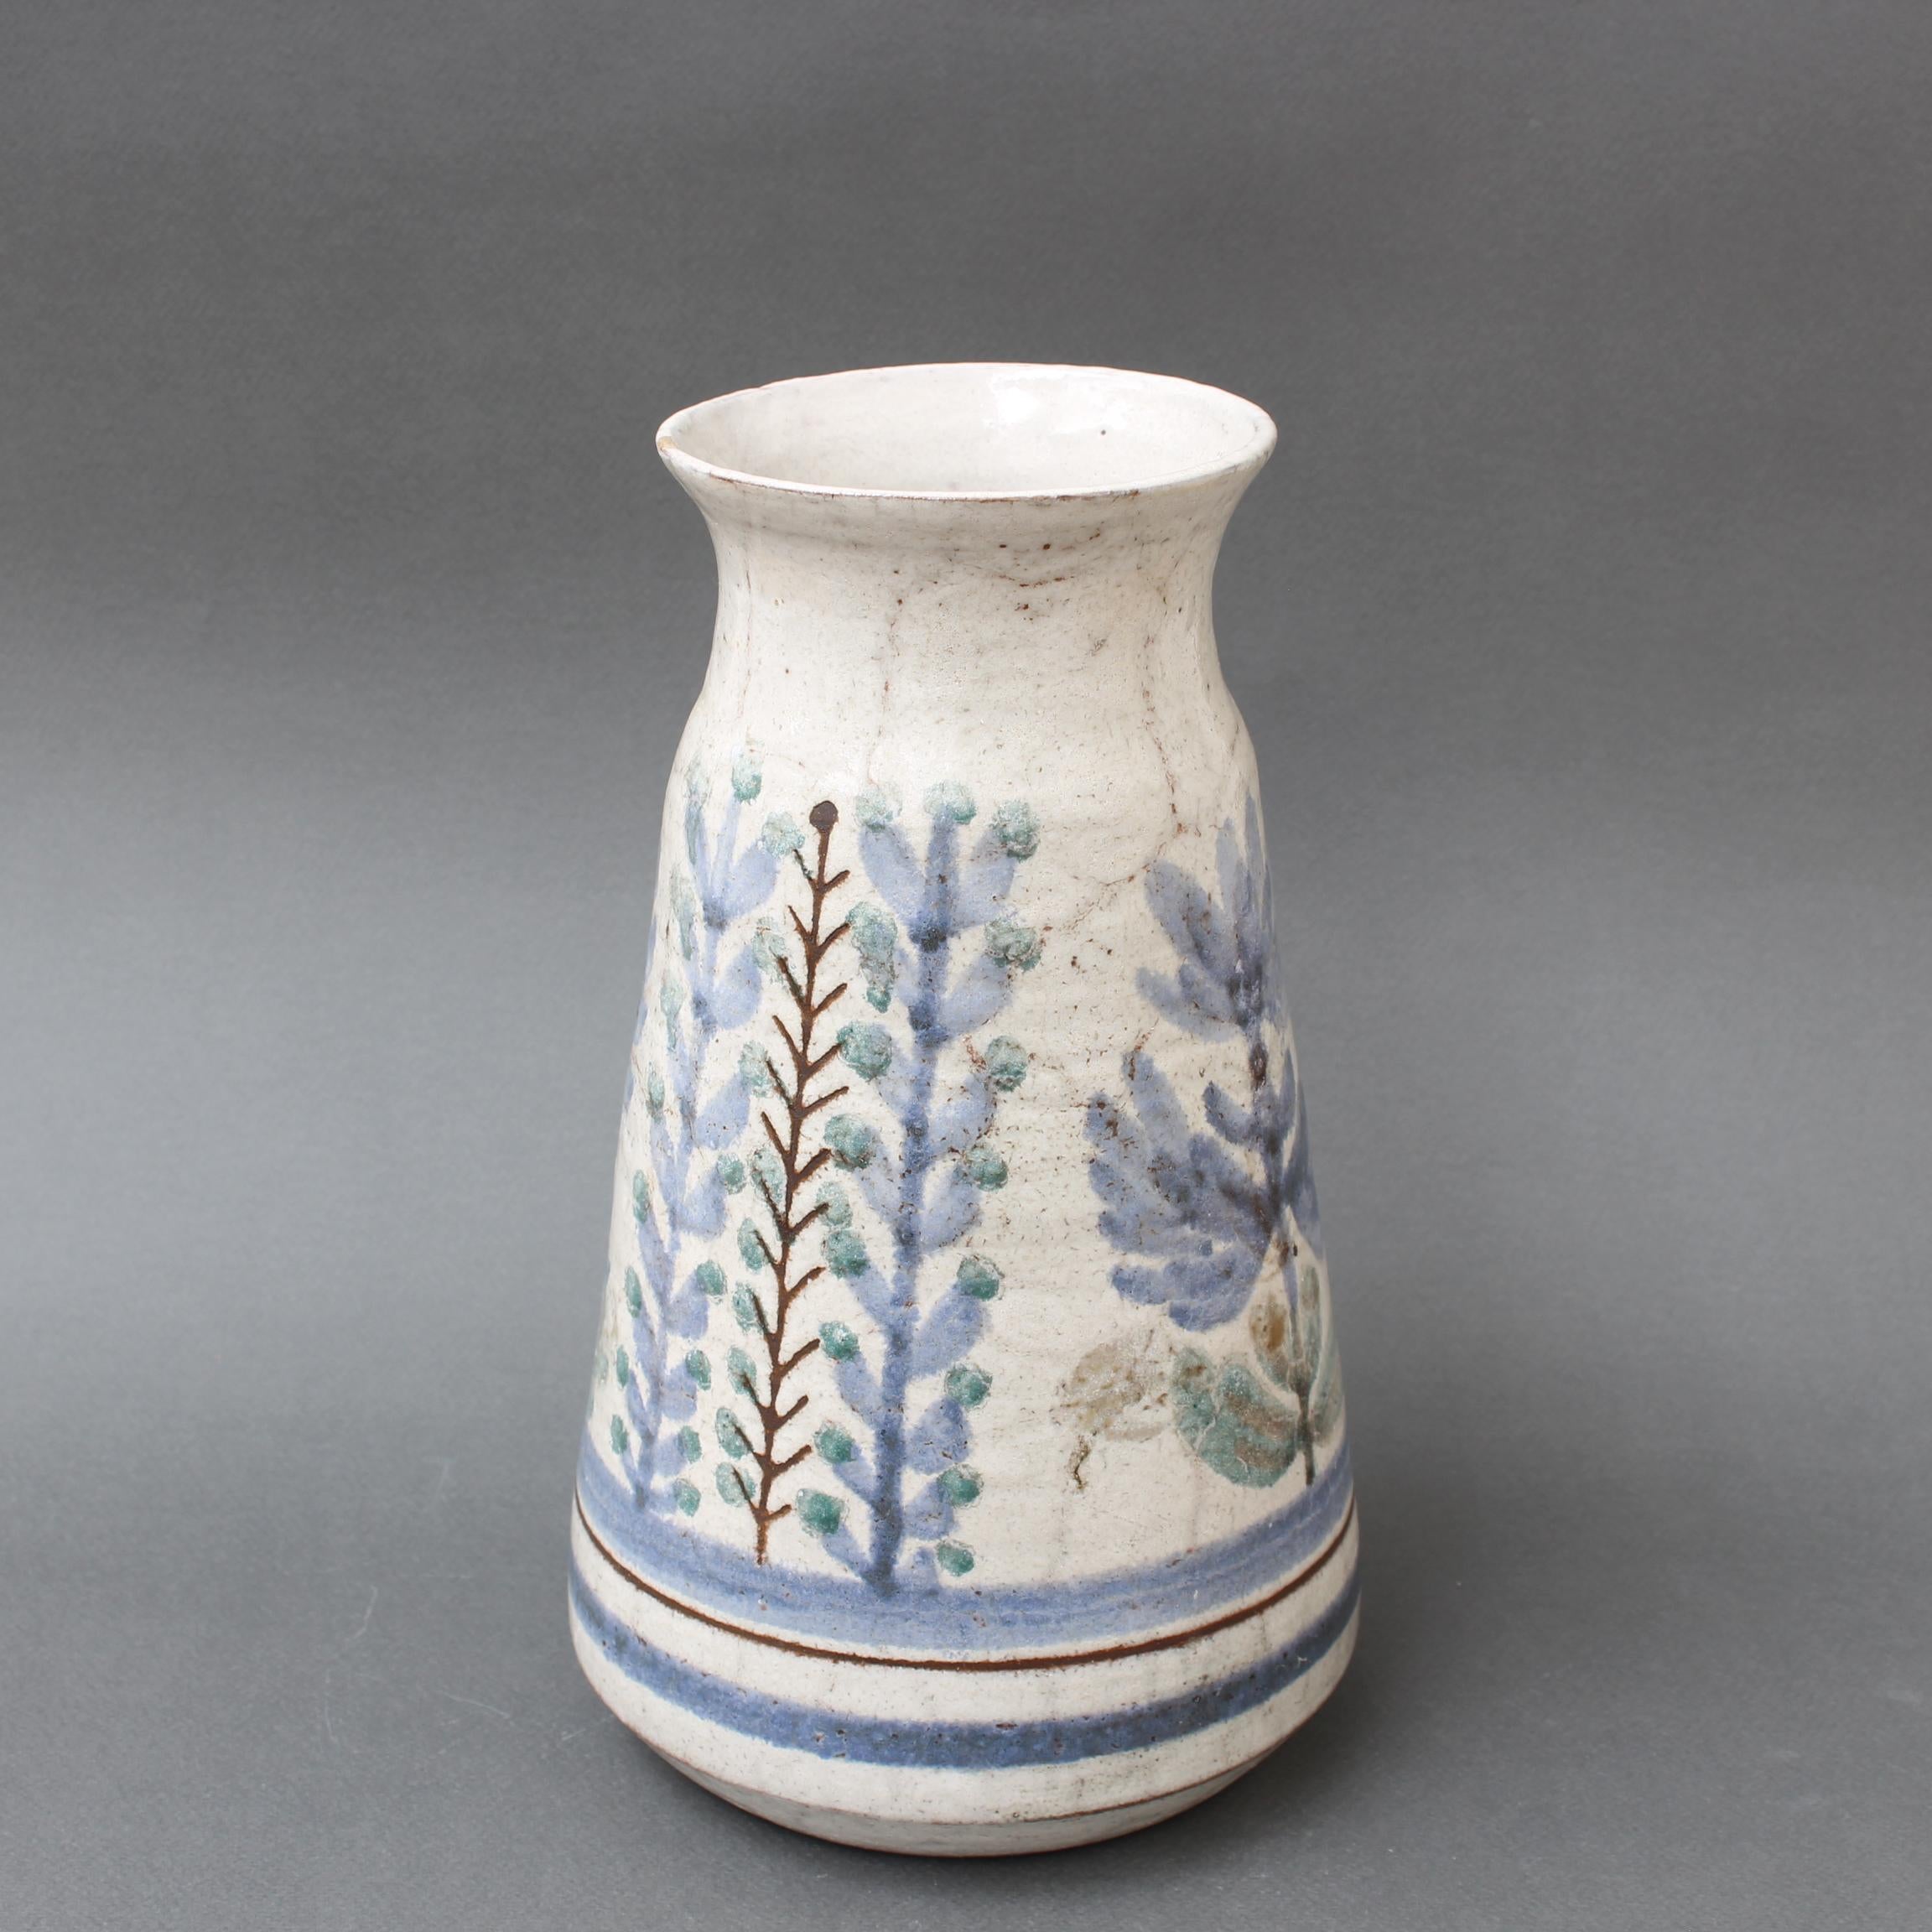 Hand-Painted French Vintage Ceramic Flower Vase by Le Mûrier (circa 1960s) For Sale